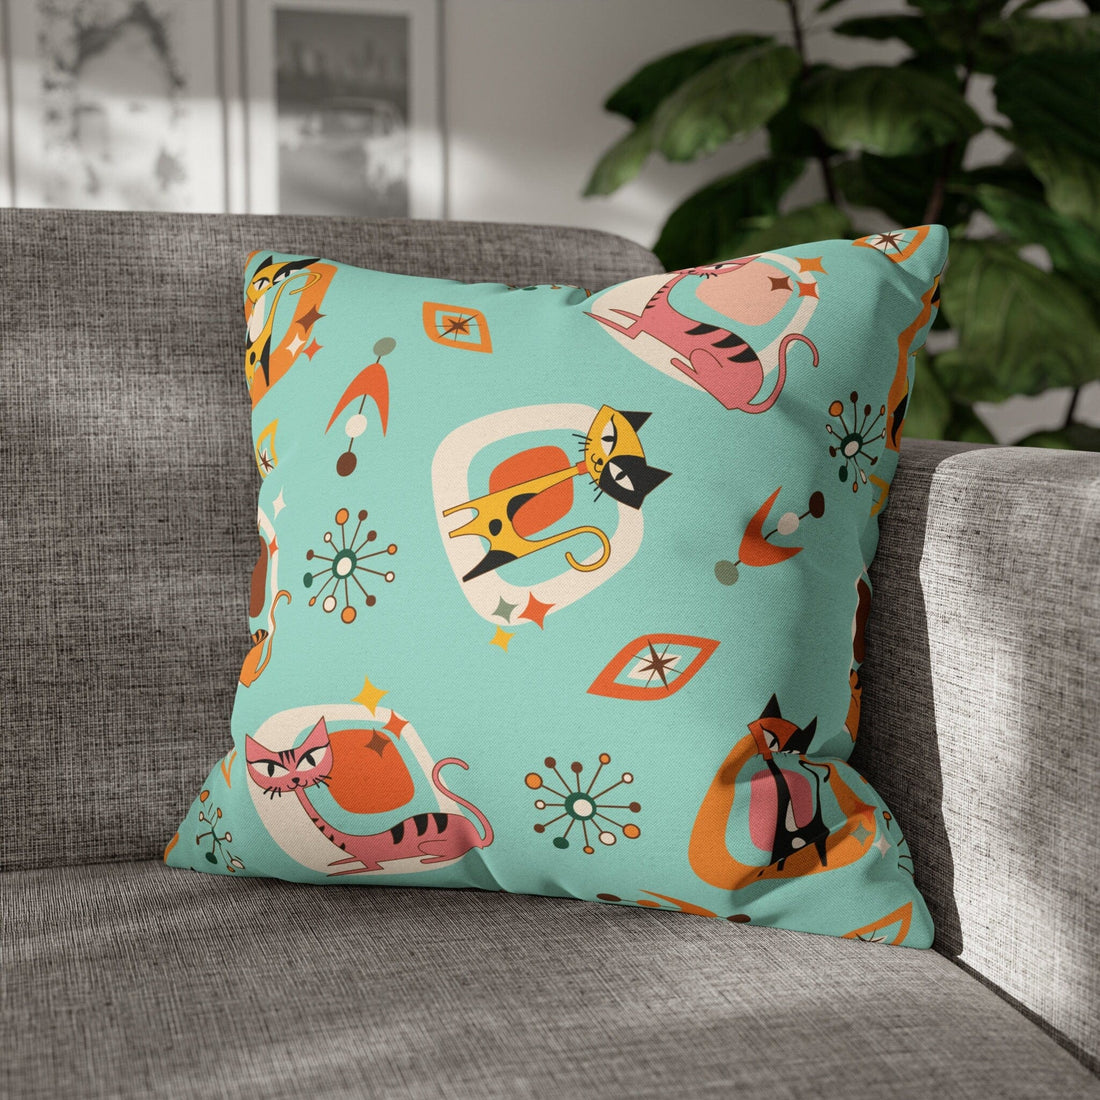 Kate McEnroe New York Atomic Cat 50s Mid Mod Pillow Cover, Retro Vintage Mid Century Modern Cushion Covers, Sputnik Kitschy Living Room, Bedroom DecorThrow Pillow Covers27841140640143423065